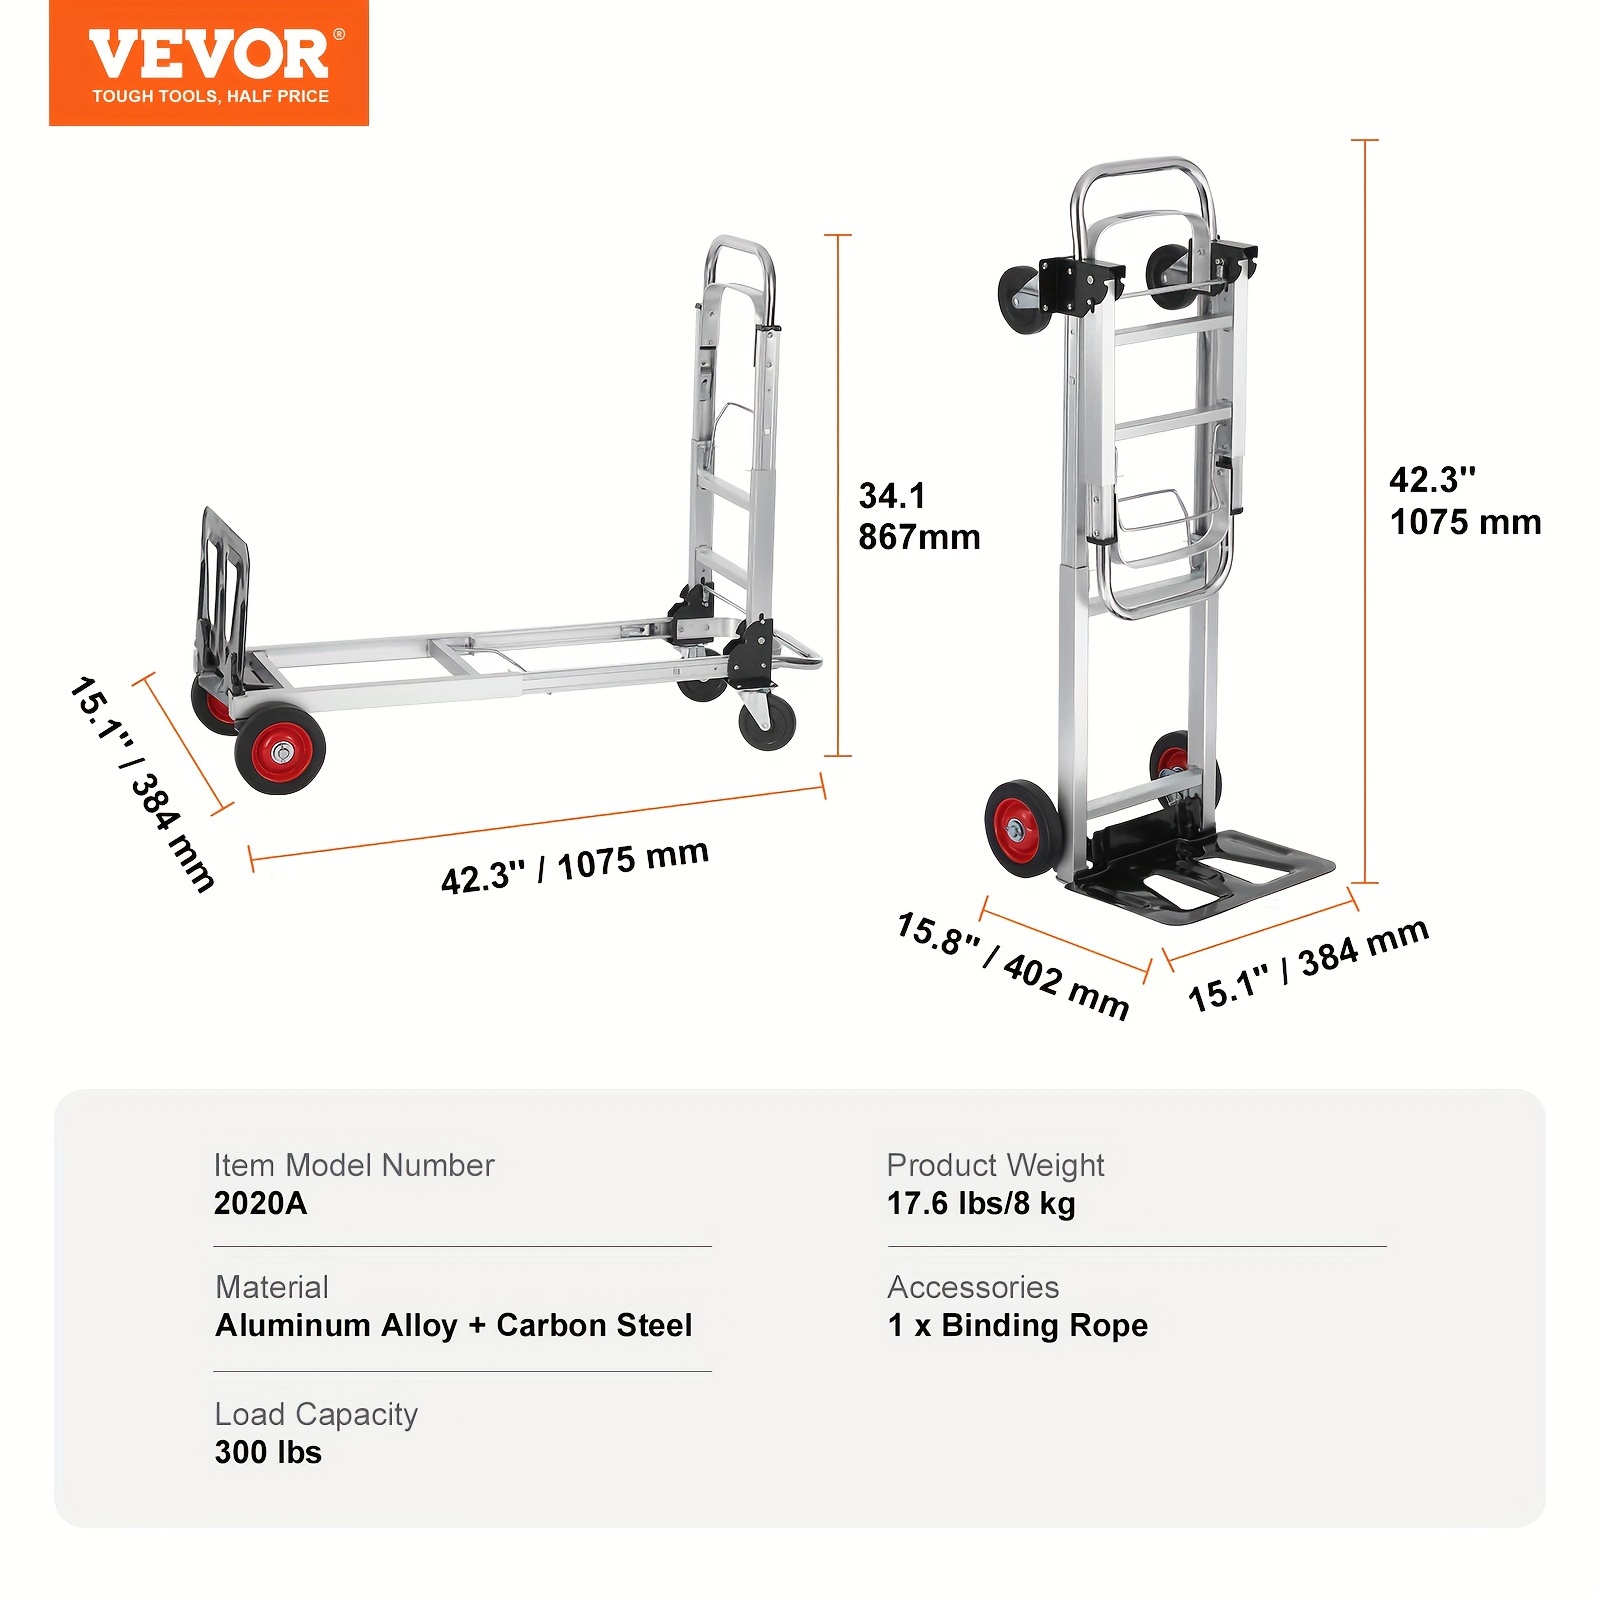 

Vevor Aluminum Folding Hand Truck, 2 In 1 Design 400 Lbs Capacity, Heavy Duty Industrial Collapsible Cart, With Rubber Wheels For Transport And Moving In Warehouse, Supermarket, Garden